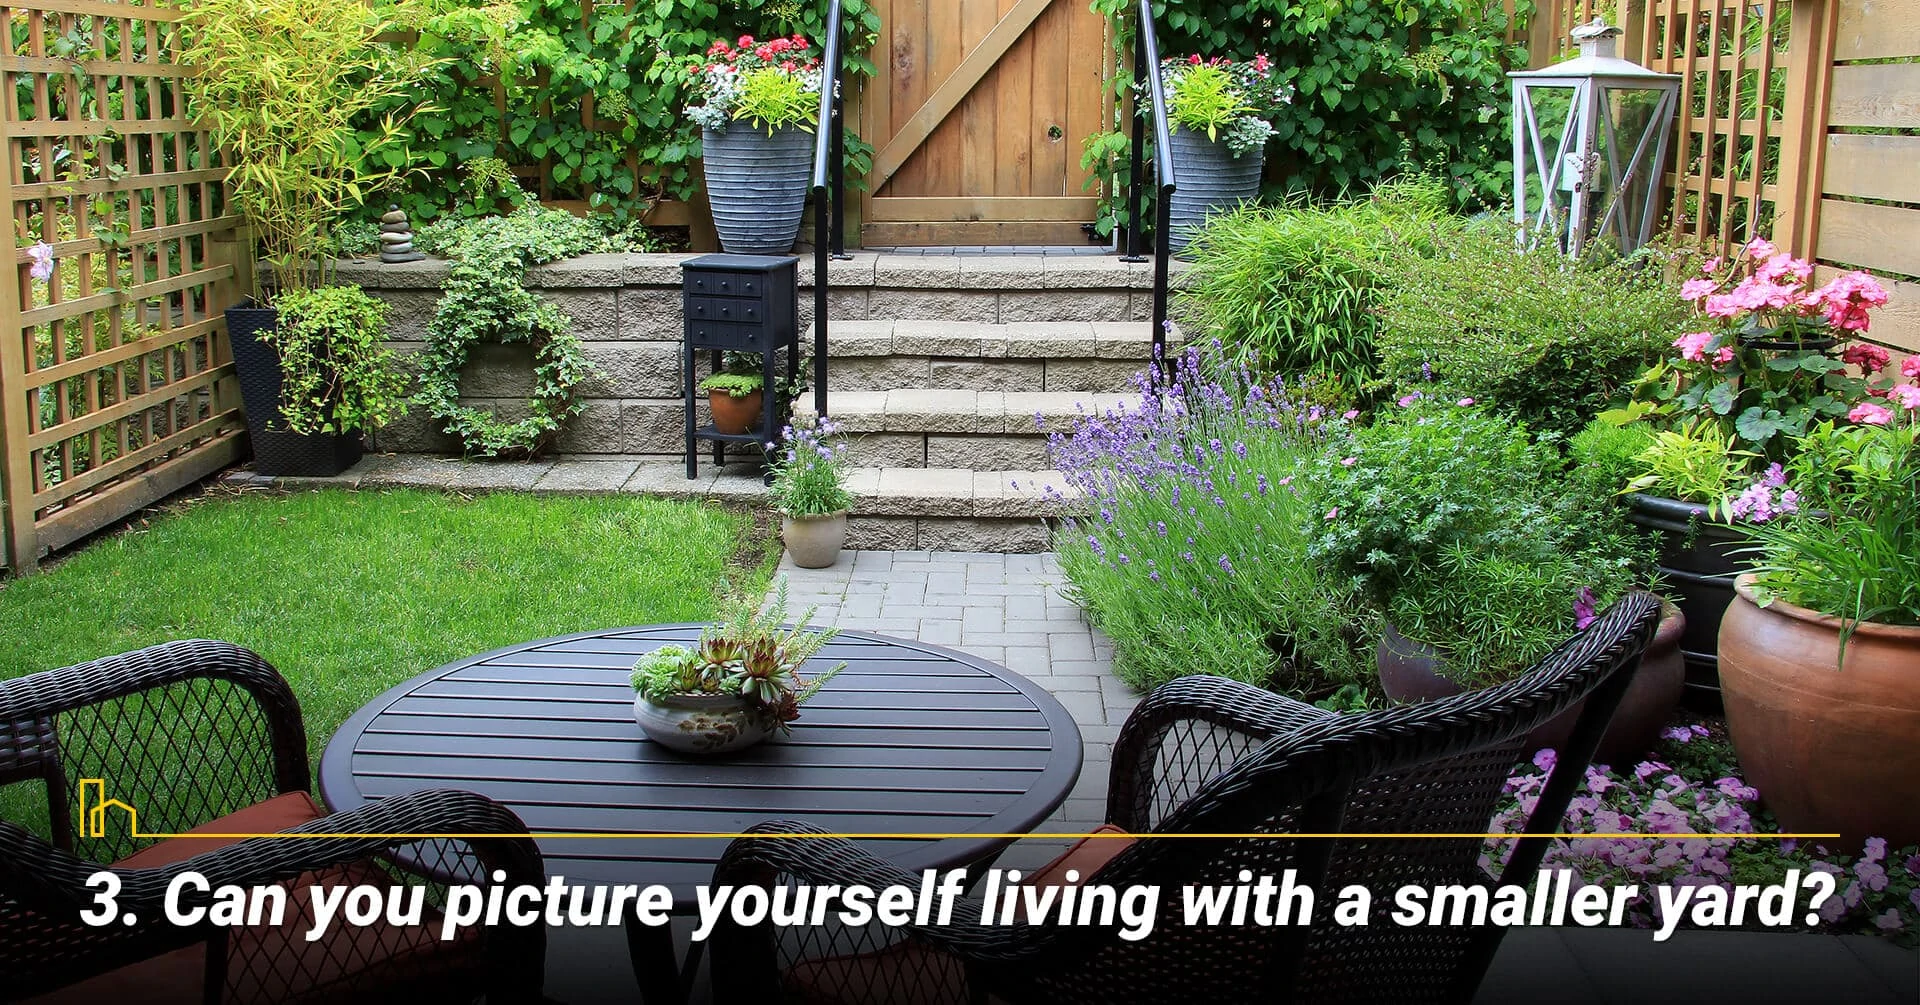 Can you picture yourself living with a smaller yard? enjoy smaller backyard